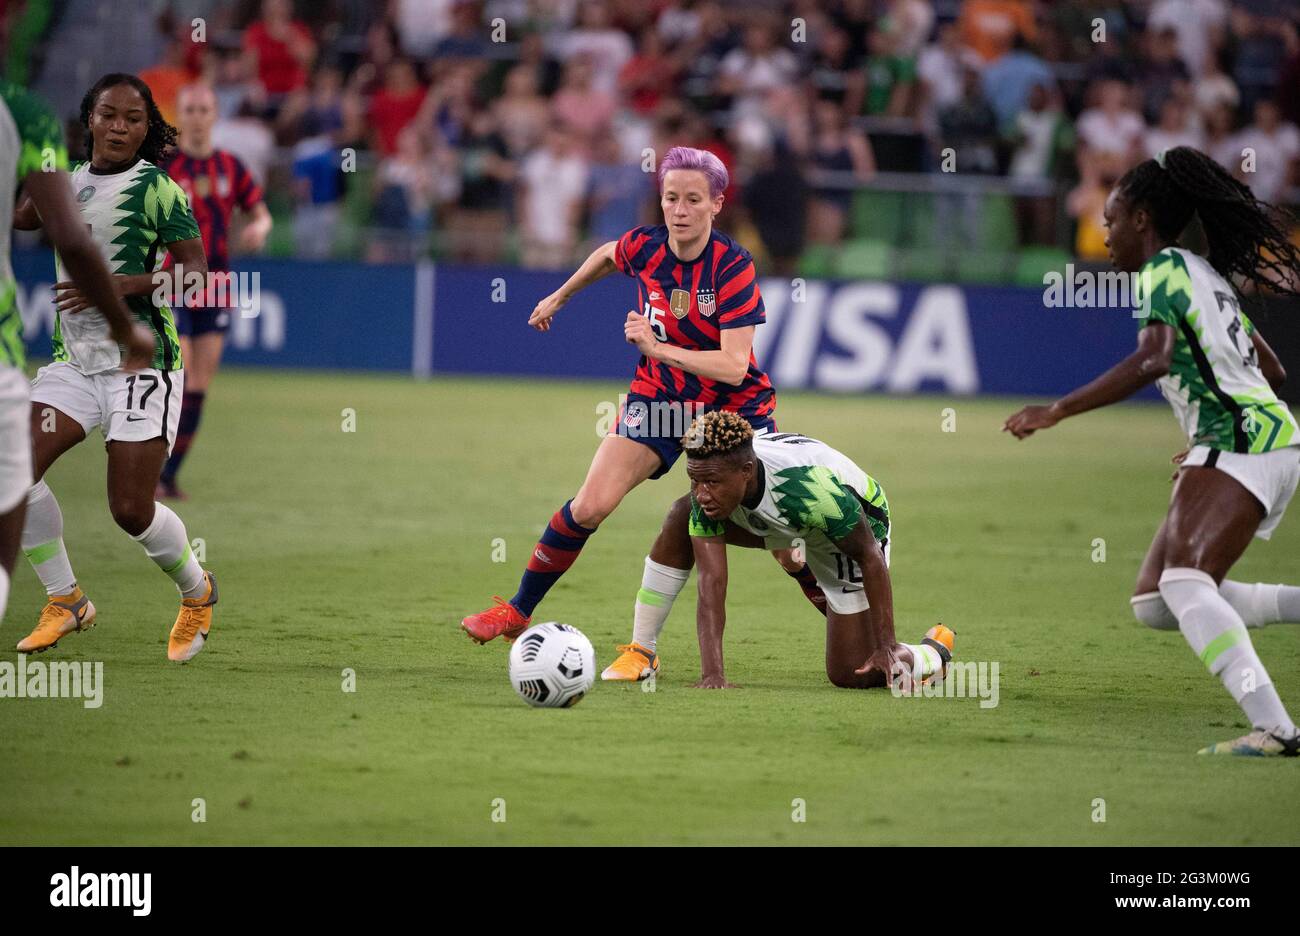 USA forward MEGAN RAPINOE (15) challenges RITA CHIKWELU (10) and MICHELLE ALOZIE (22) of Nigeria during the second half of the US Women's National Team (USWNT) 2-0 victory over Nigeria, in the first match at Austin's Q2 Stadium. The U.S. women's team, an Olympic favorite, is wrapping up a series of summer matches to prep for the Tokyo Games. Press scored a goal in the win for USA Soccer. Credit: Bob Daemmrich/Alamy Live News Stock Photo